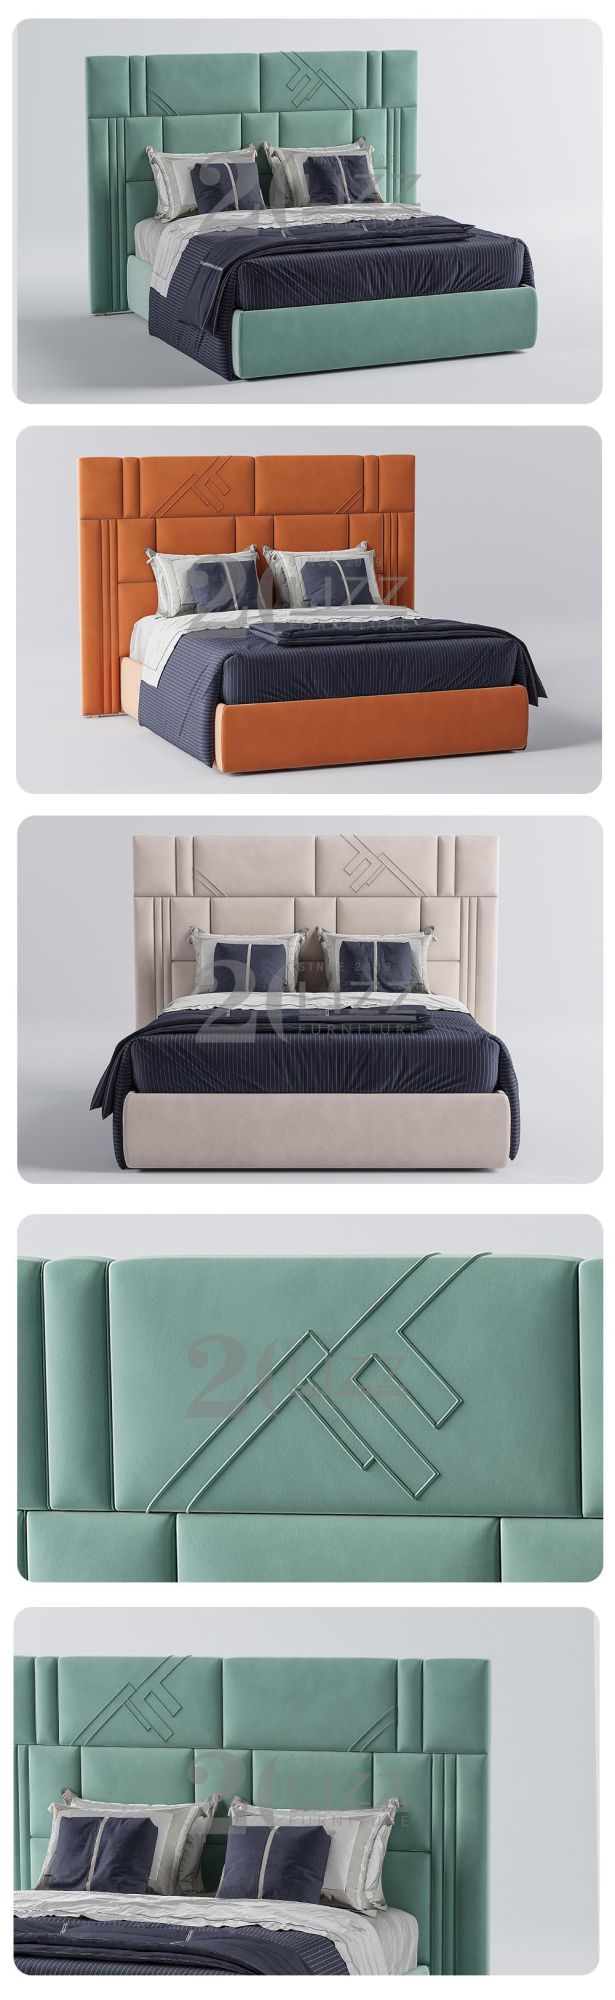 High Quality Hotel Bedroom Furniture Set Modern Home Fabric King Size Bed with Headboard Wall